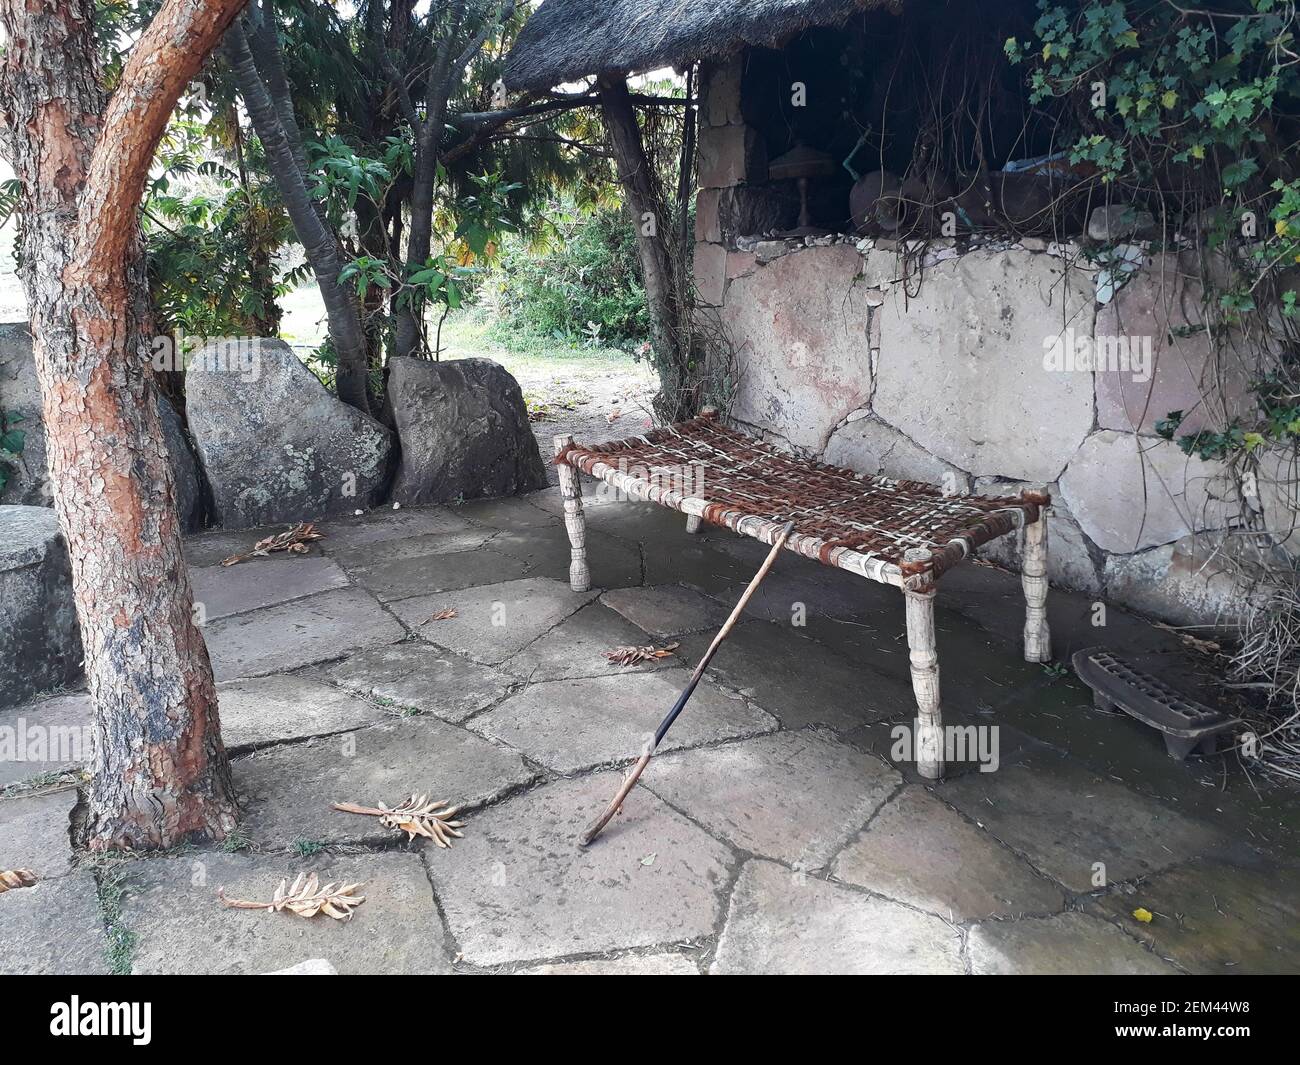 Traditional African wood frame and leather strap bench outside a thatched hut Stock Photo